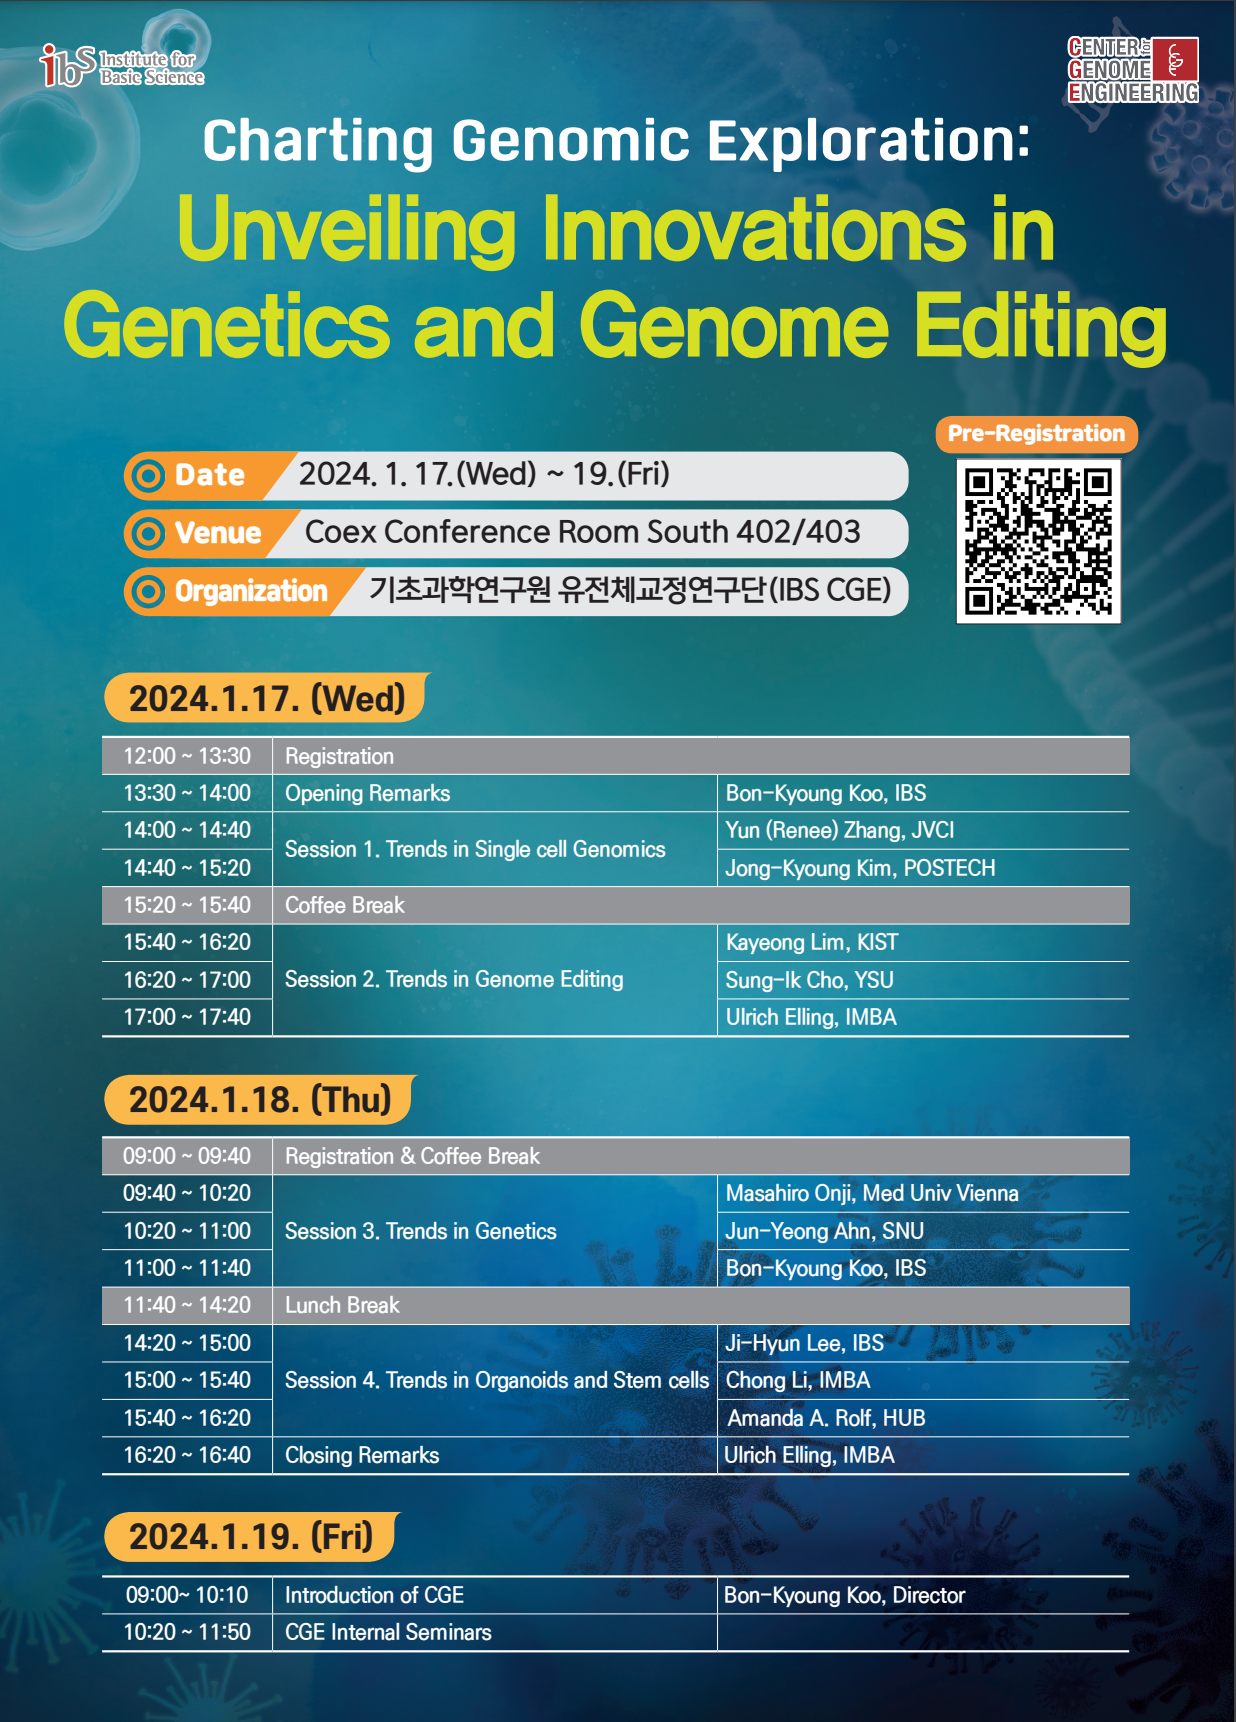 2nd Charting Genomic Exploration: Unveiling Innovations in Genetics and Genome Editing 사진